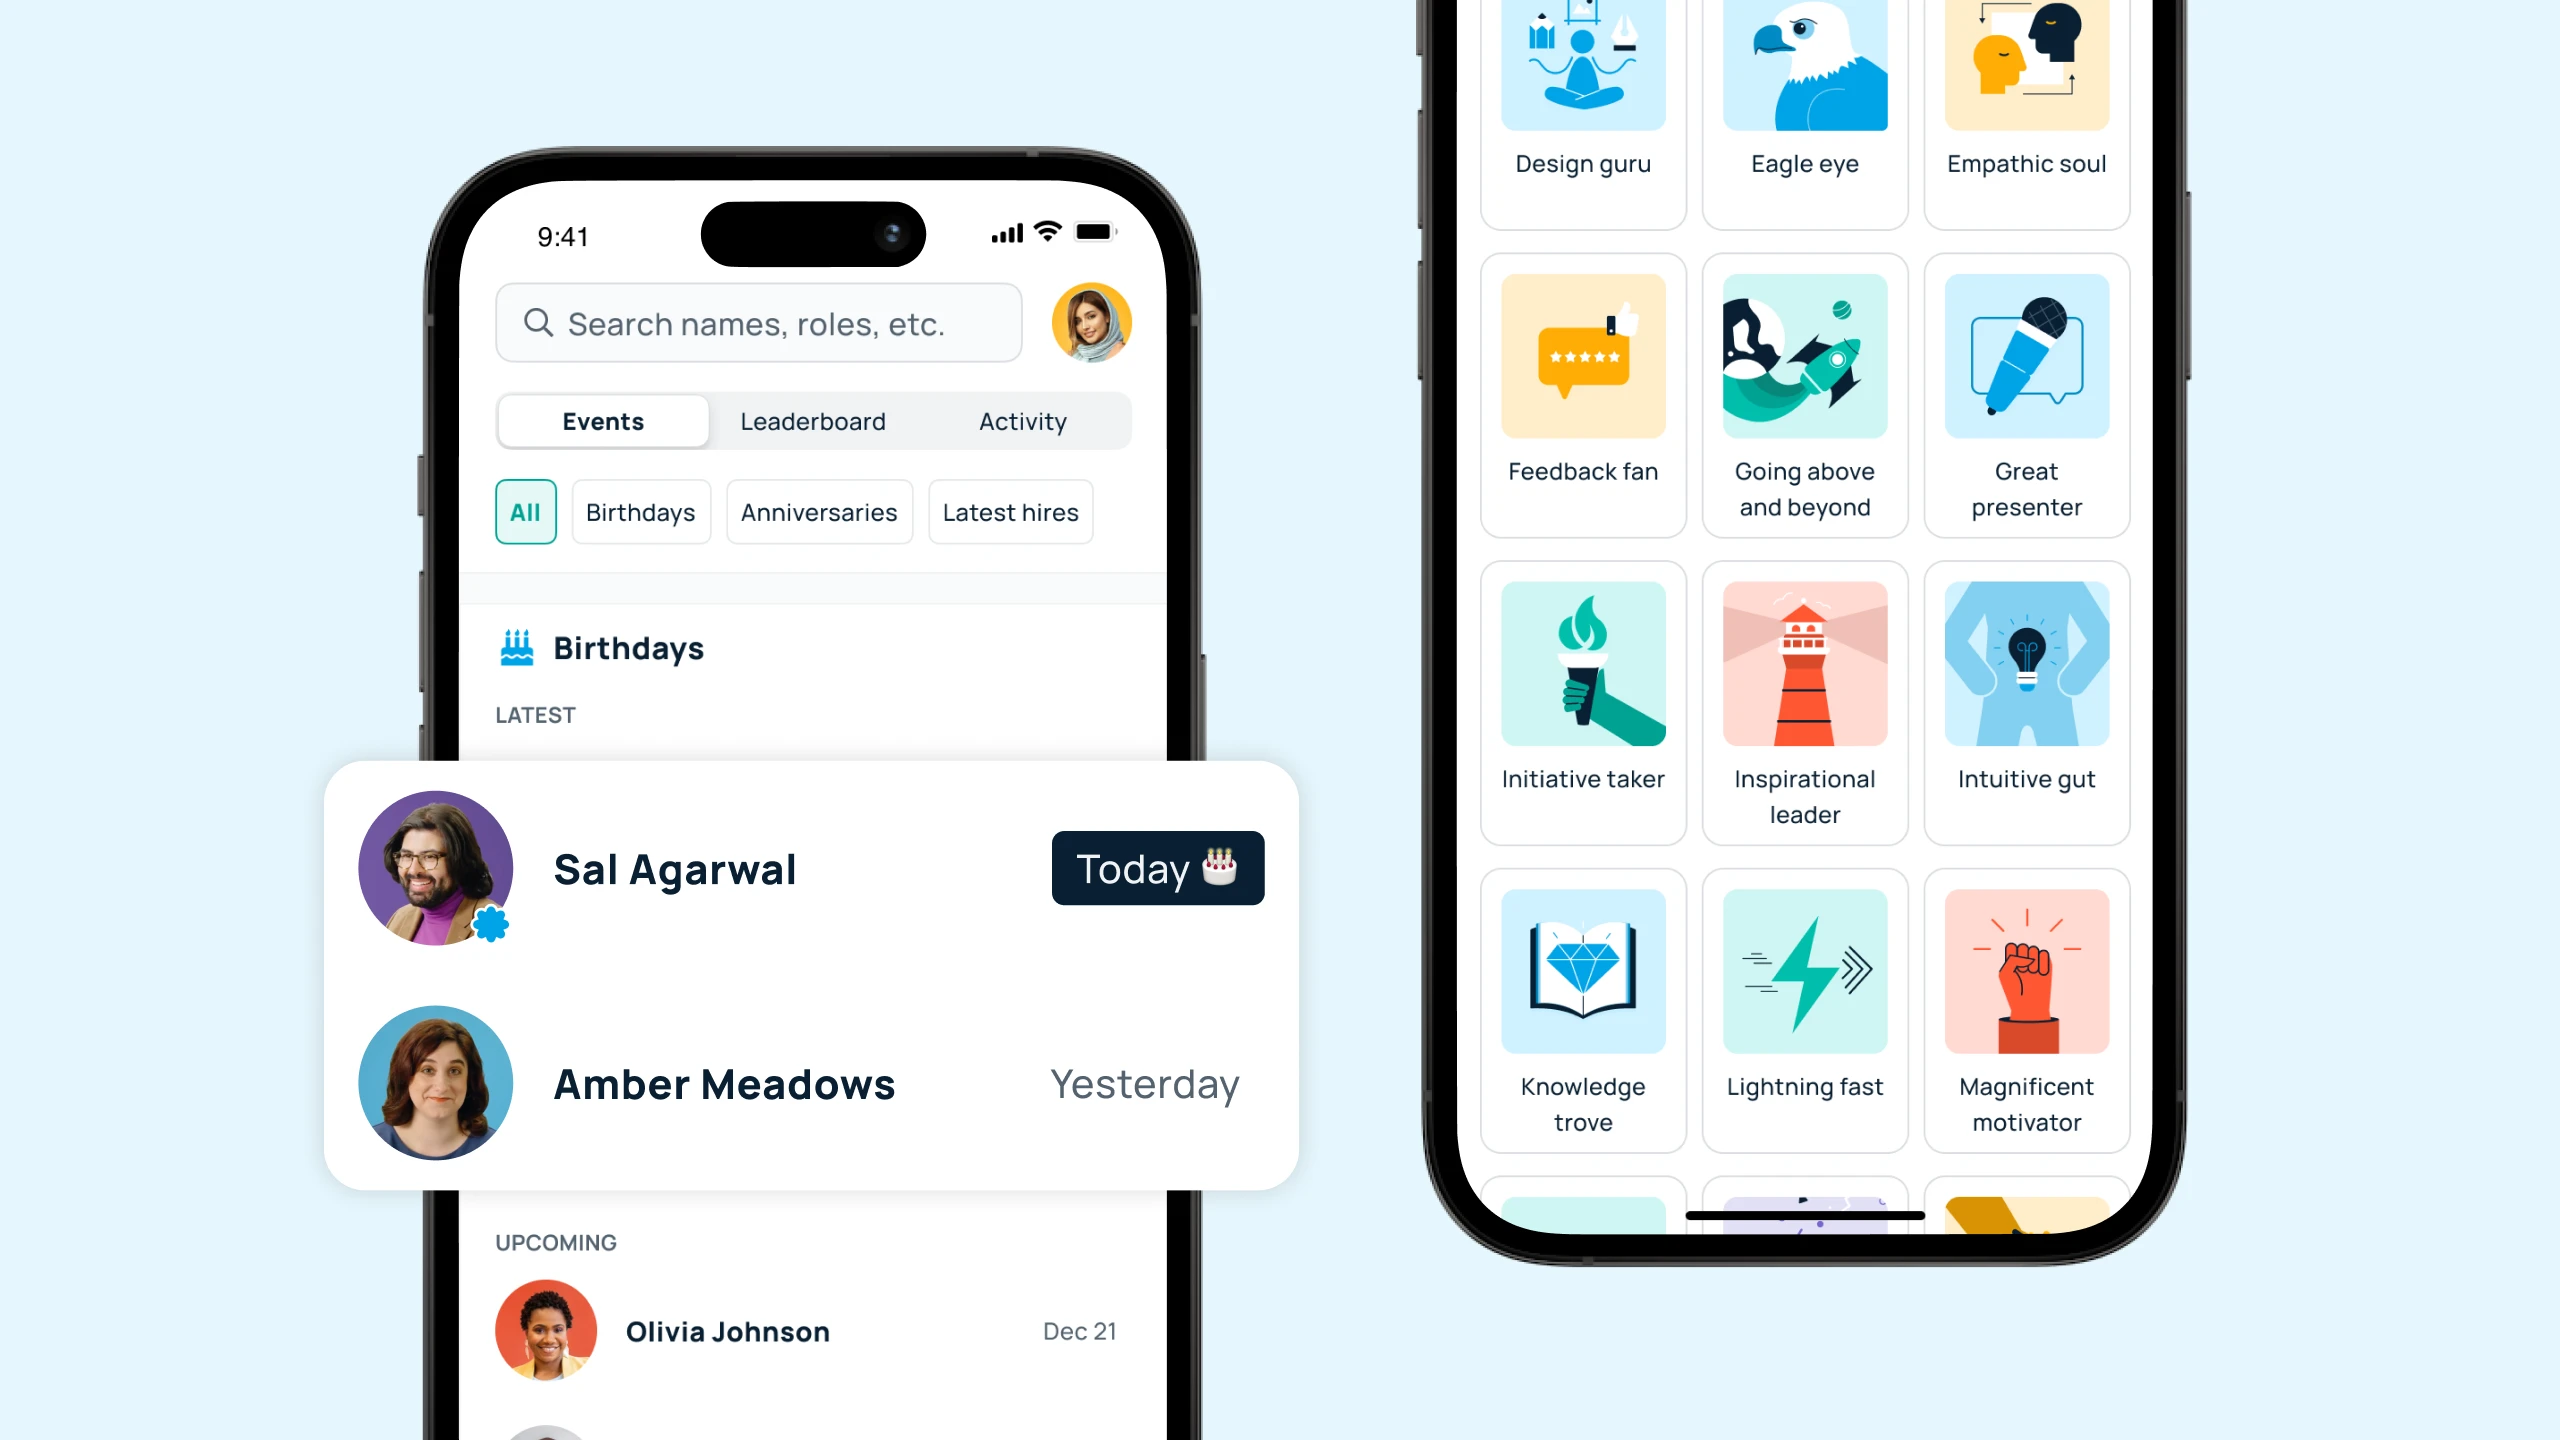 GoProfiles for Employee Engagement | Stay connected with your team by leveraging the iOS app